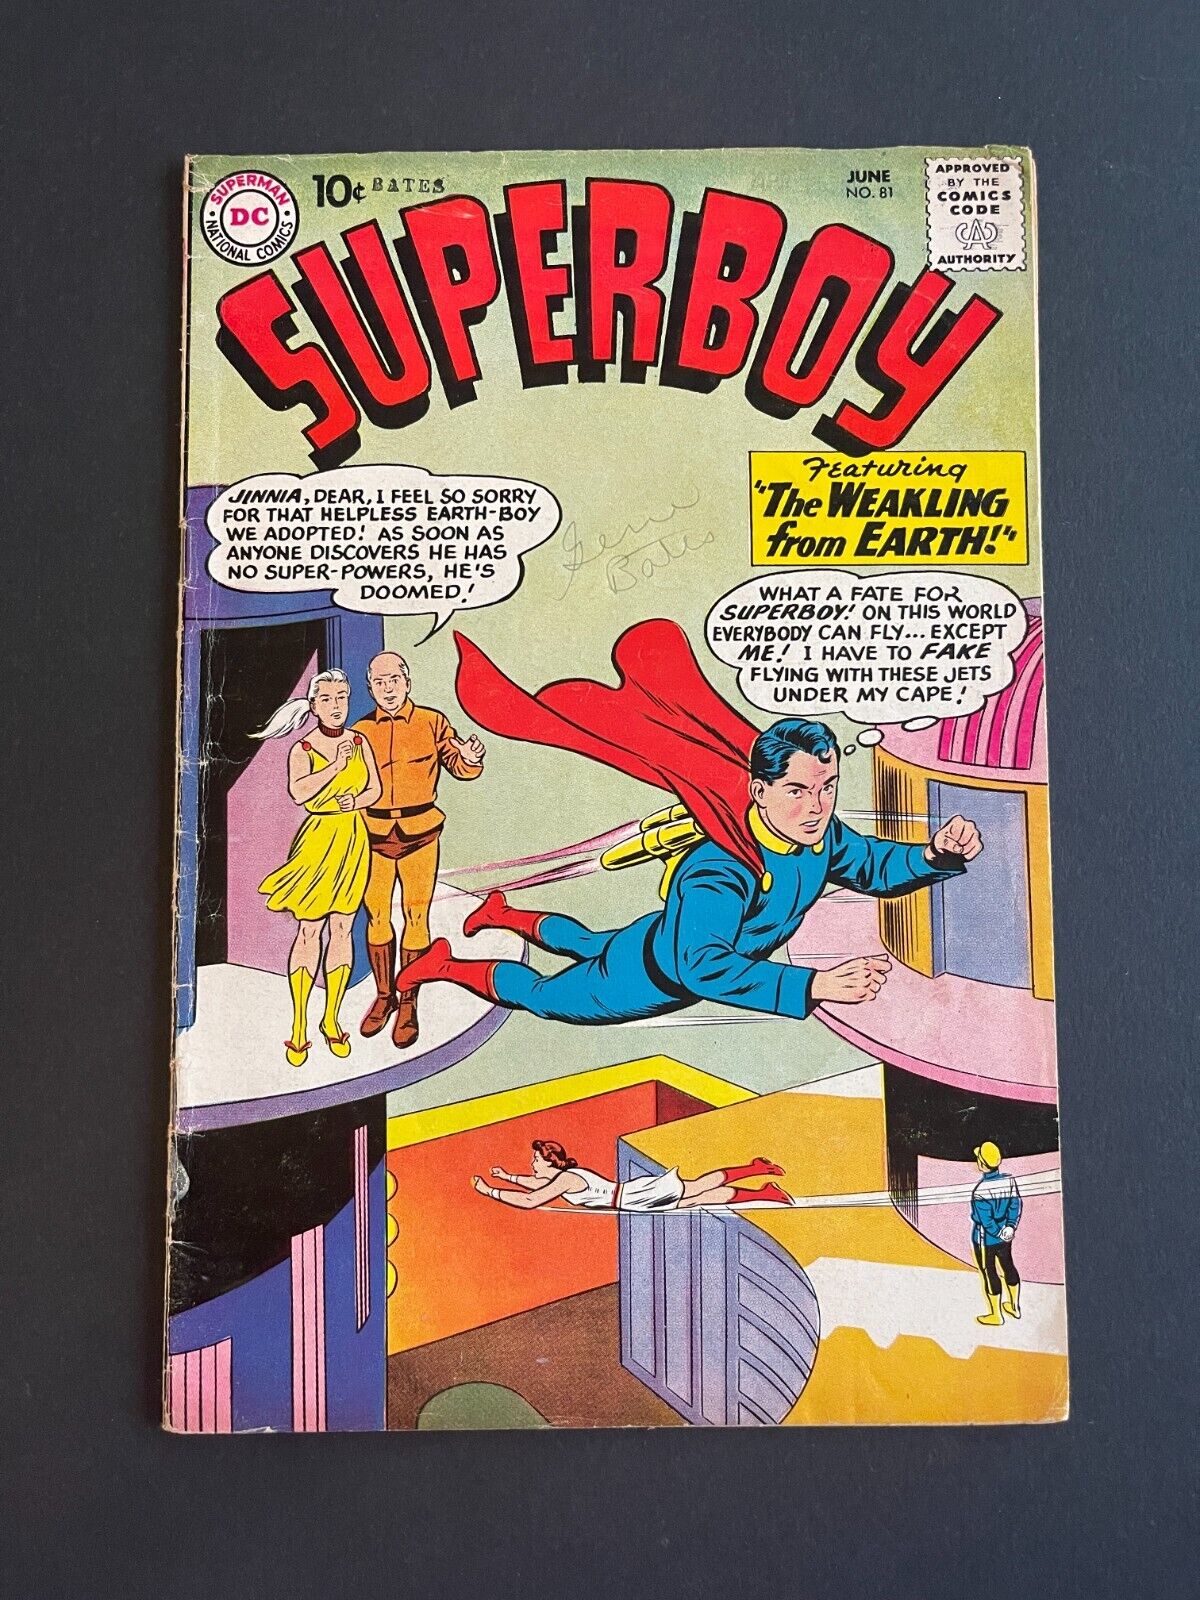 Superboy #81 - The Weakling from Earth  (DC, 1960) VG+